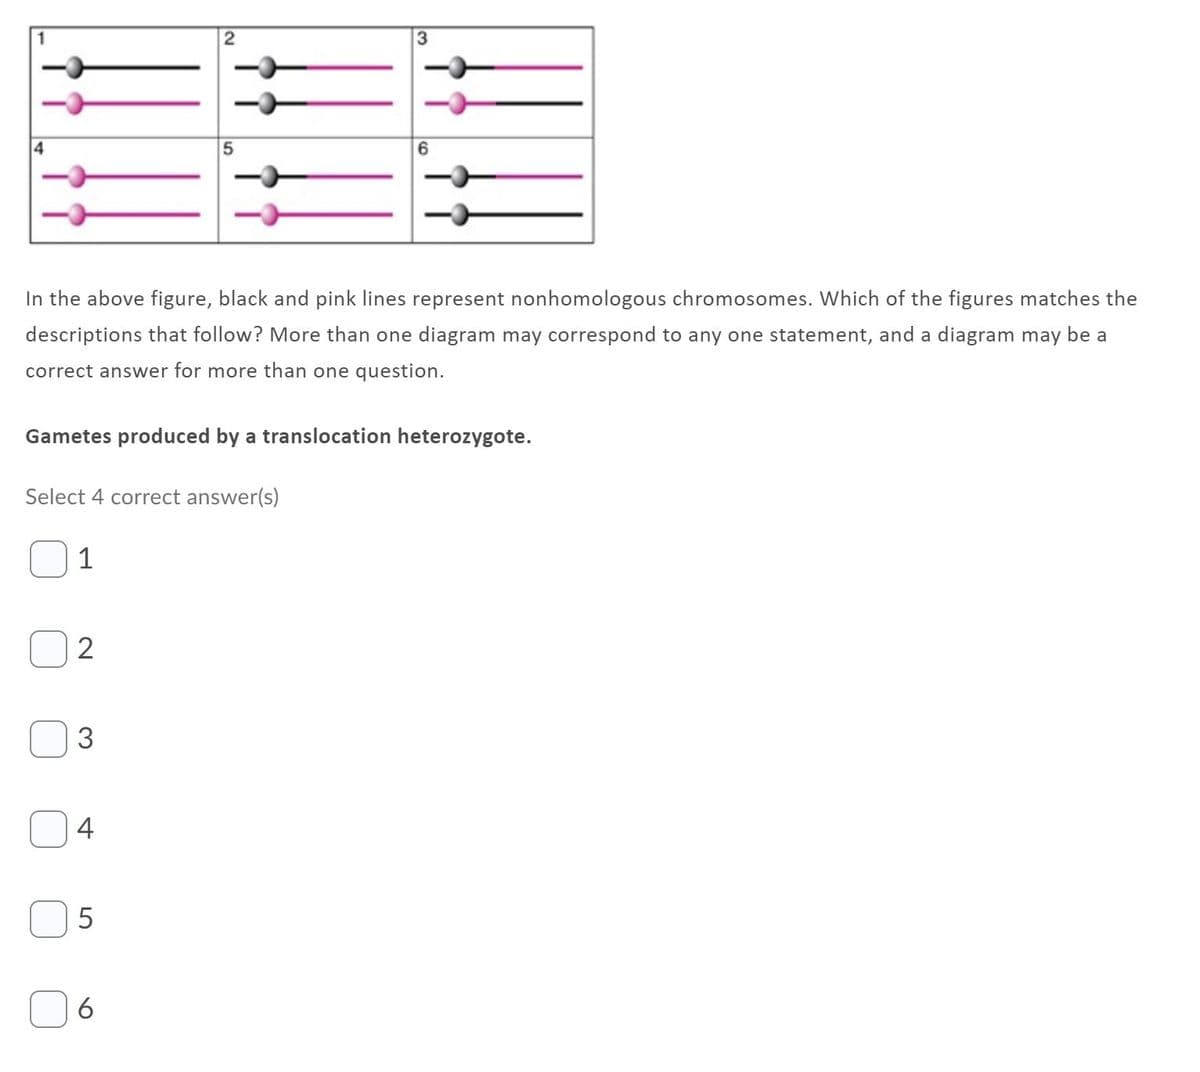 In the above figure, black and pink lines represent nonhomologous chromosomes. Which of the figures matches the
descriptions that follow? More than one diagram may correspond to any one statement, and a diagram may be a
correct answer for more than one question.
Gametes produced by a translocation heterozygote.
Select 4 correct answer(s)
1
3
4
2.
